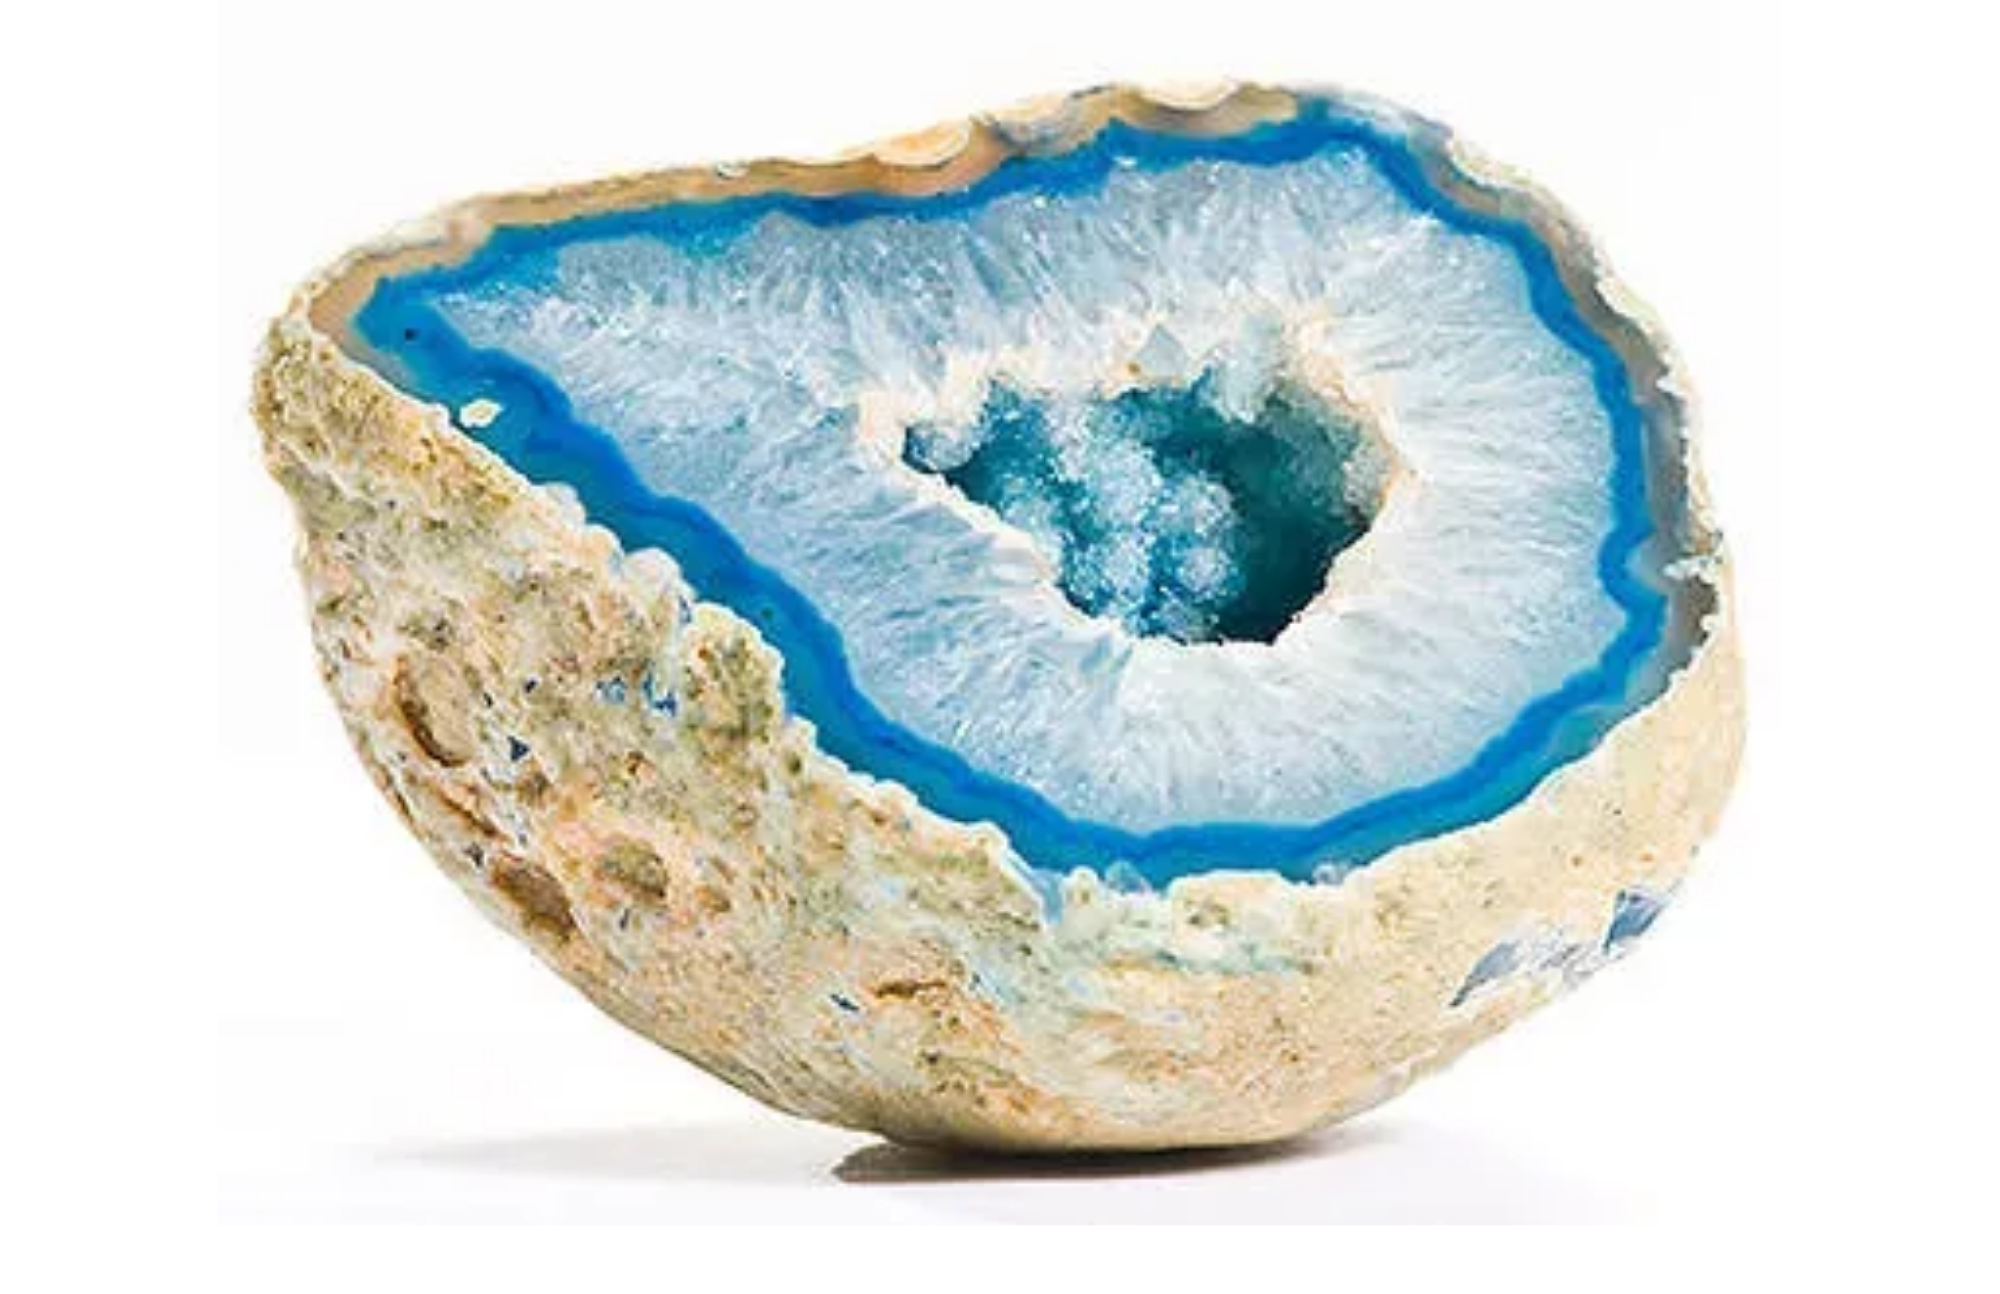 A semi-round rock with blue agate inside of it